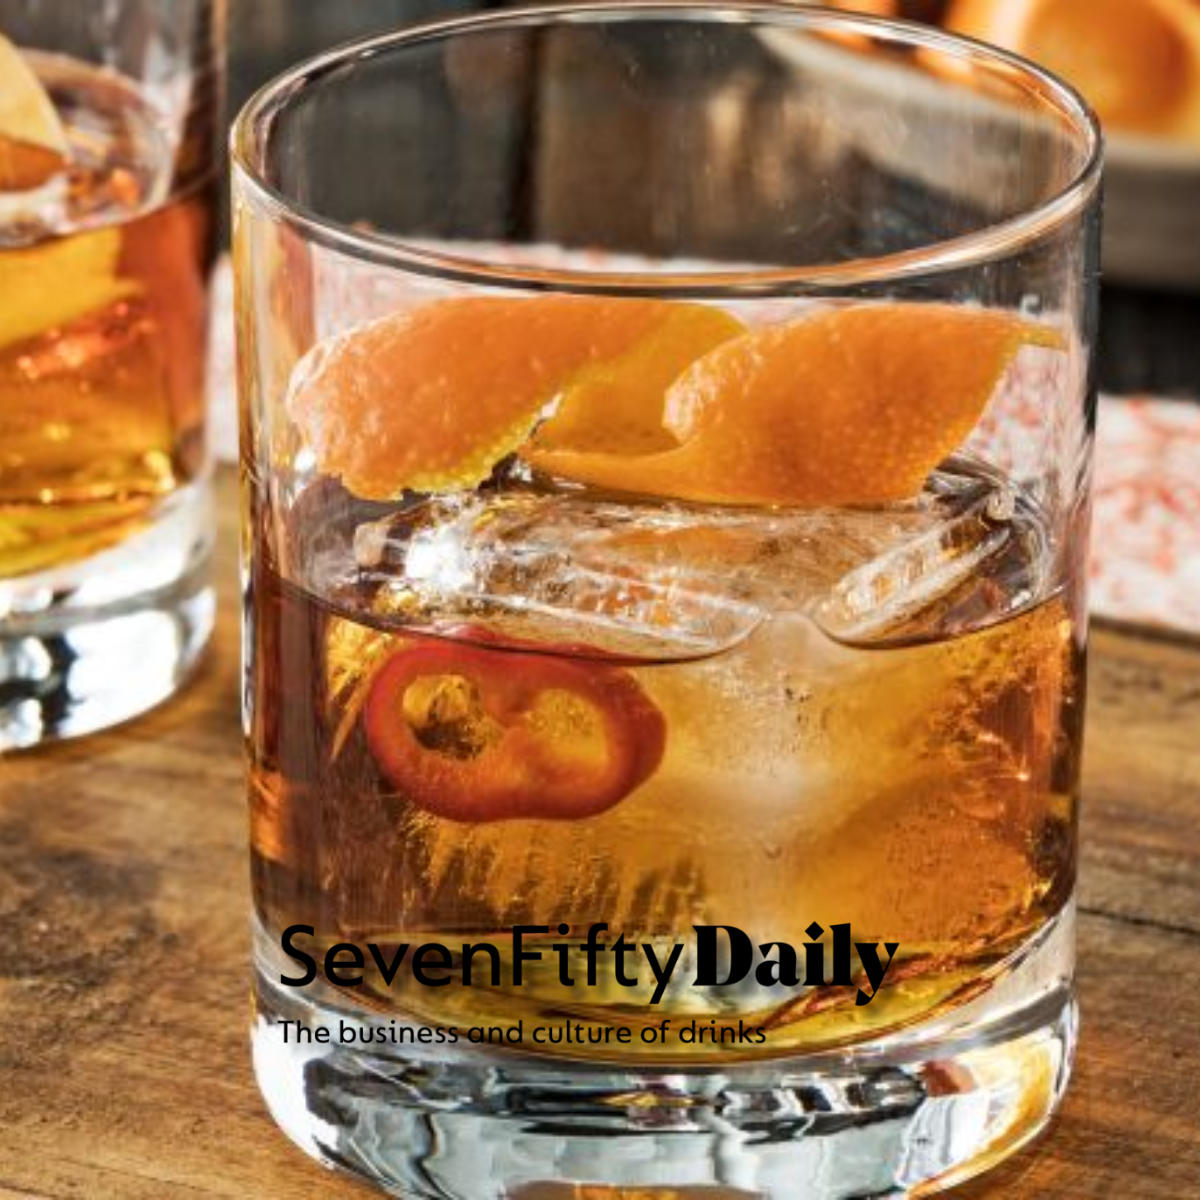 SEVENFIFTY DAILY - Showcasing Añejo Tequila in an Old Fashioned